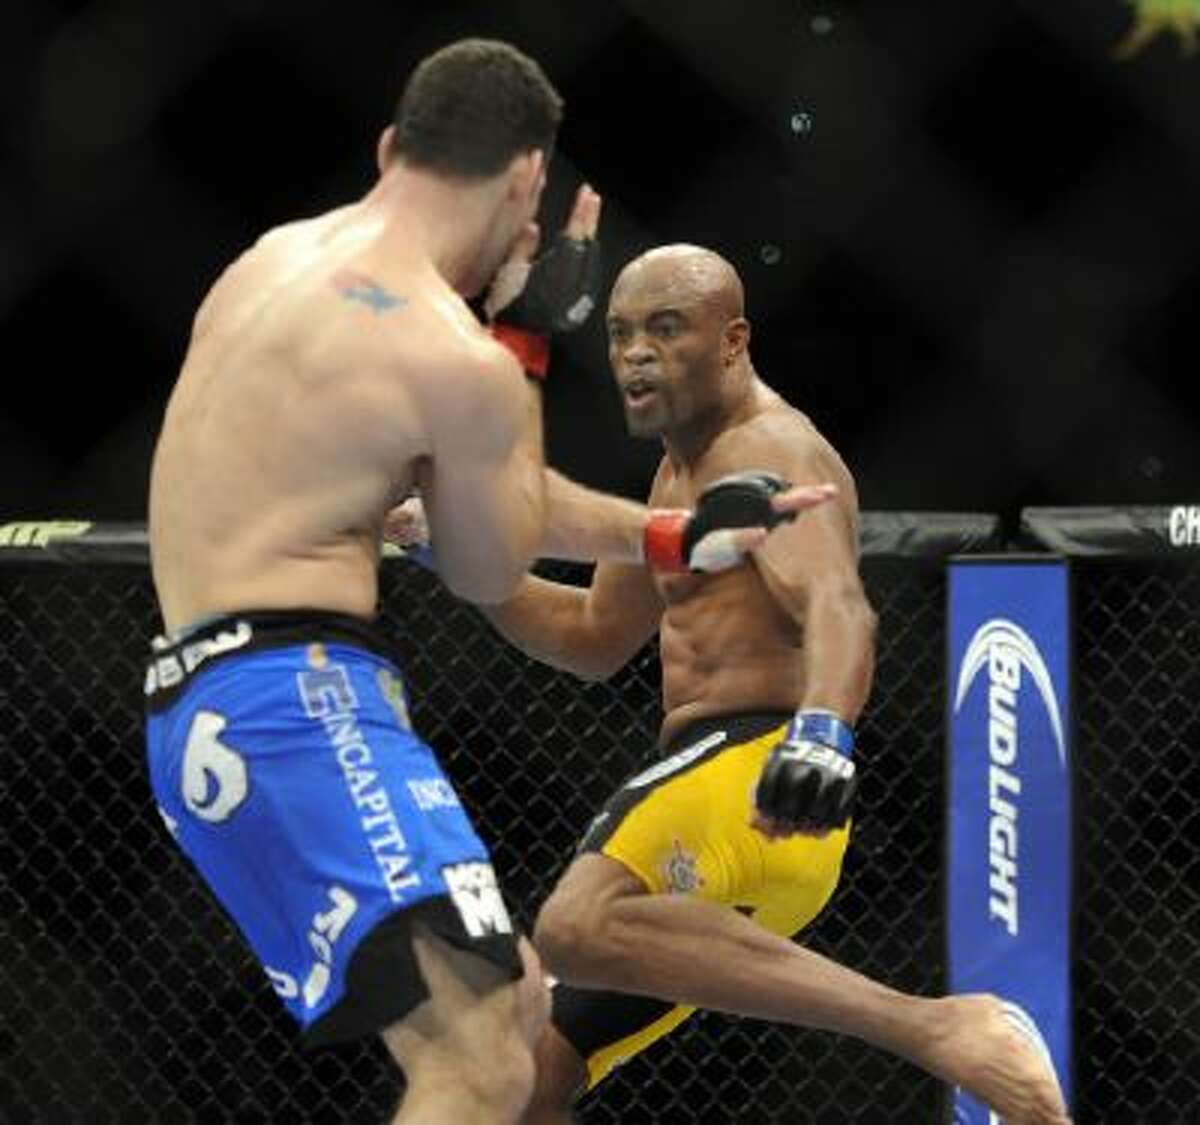 Anderson Silva, right, of Brazil, prepares to kick Chris Weidman of Baldwin, N.Y., during the UFC 168 mixed martial arts middleweight championship bout on Saturday, Dec. 28, 2013, in Las Vegas.